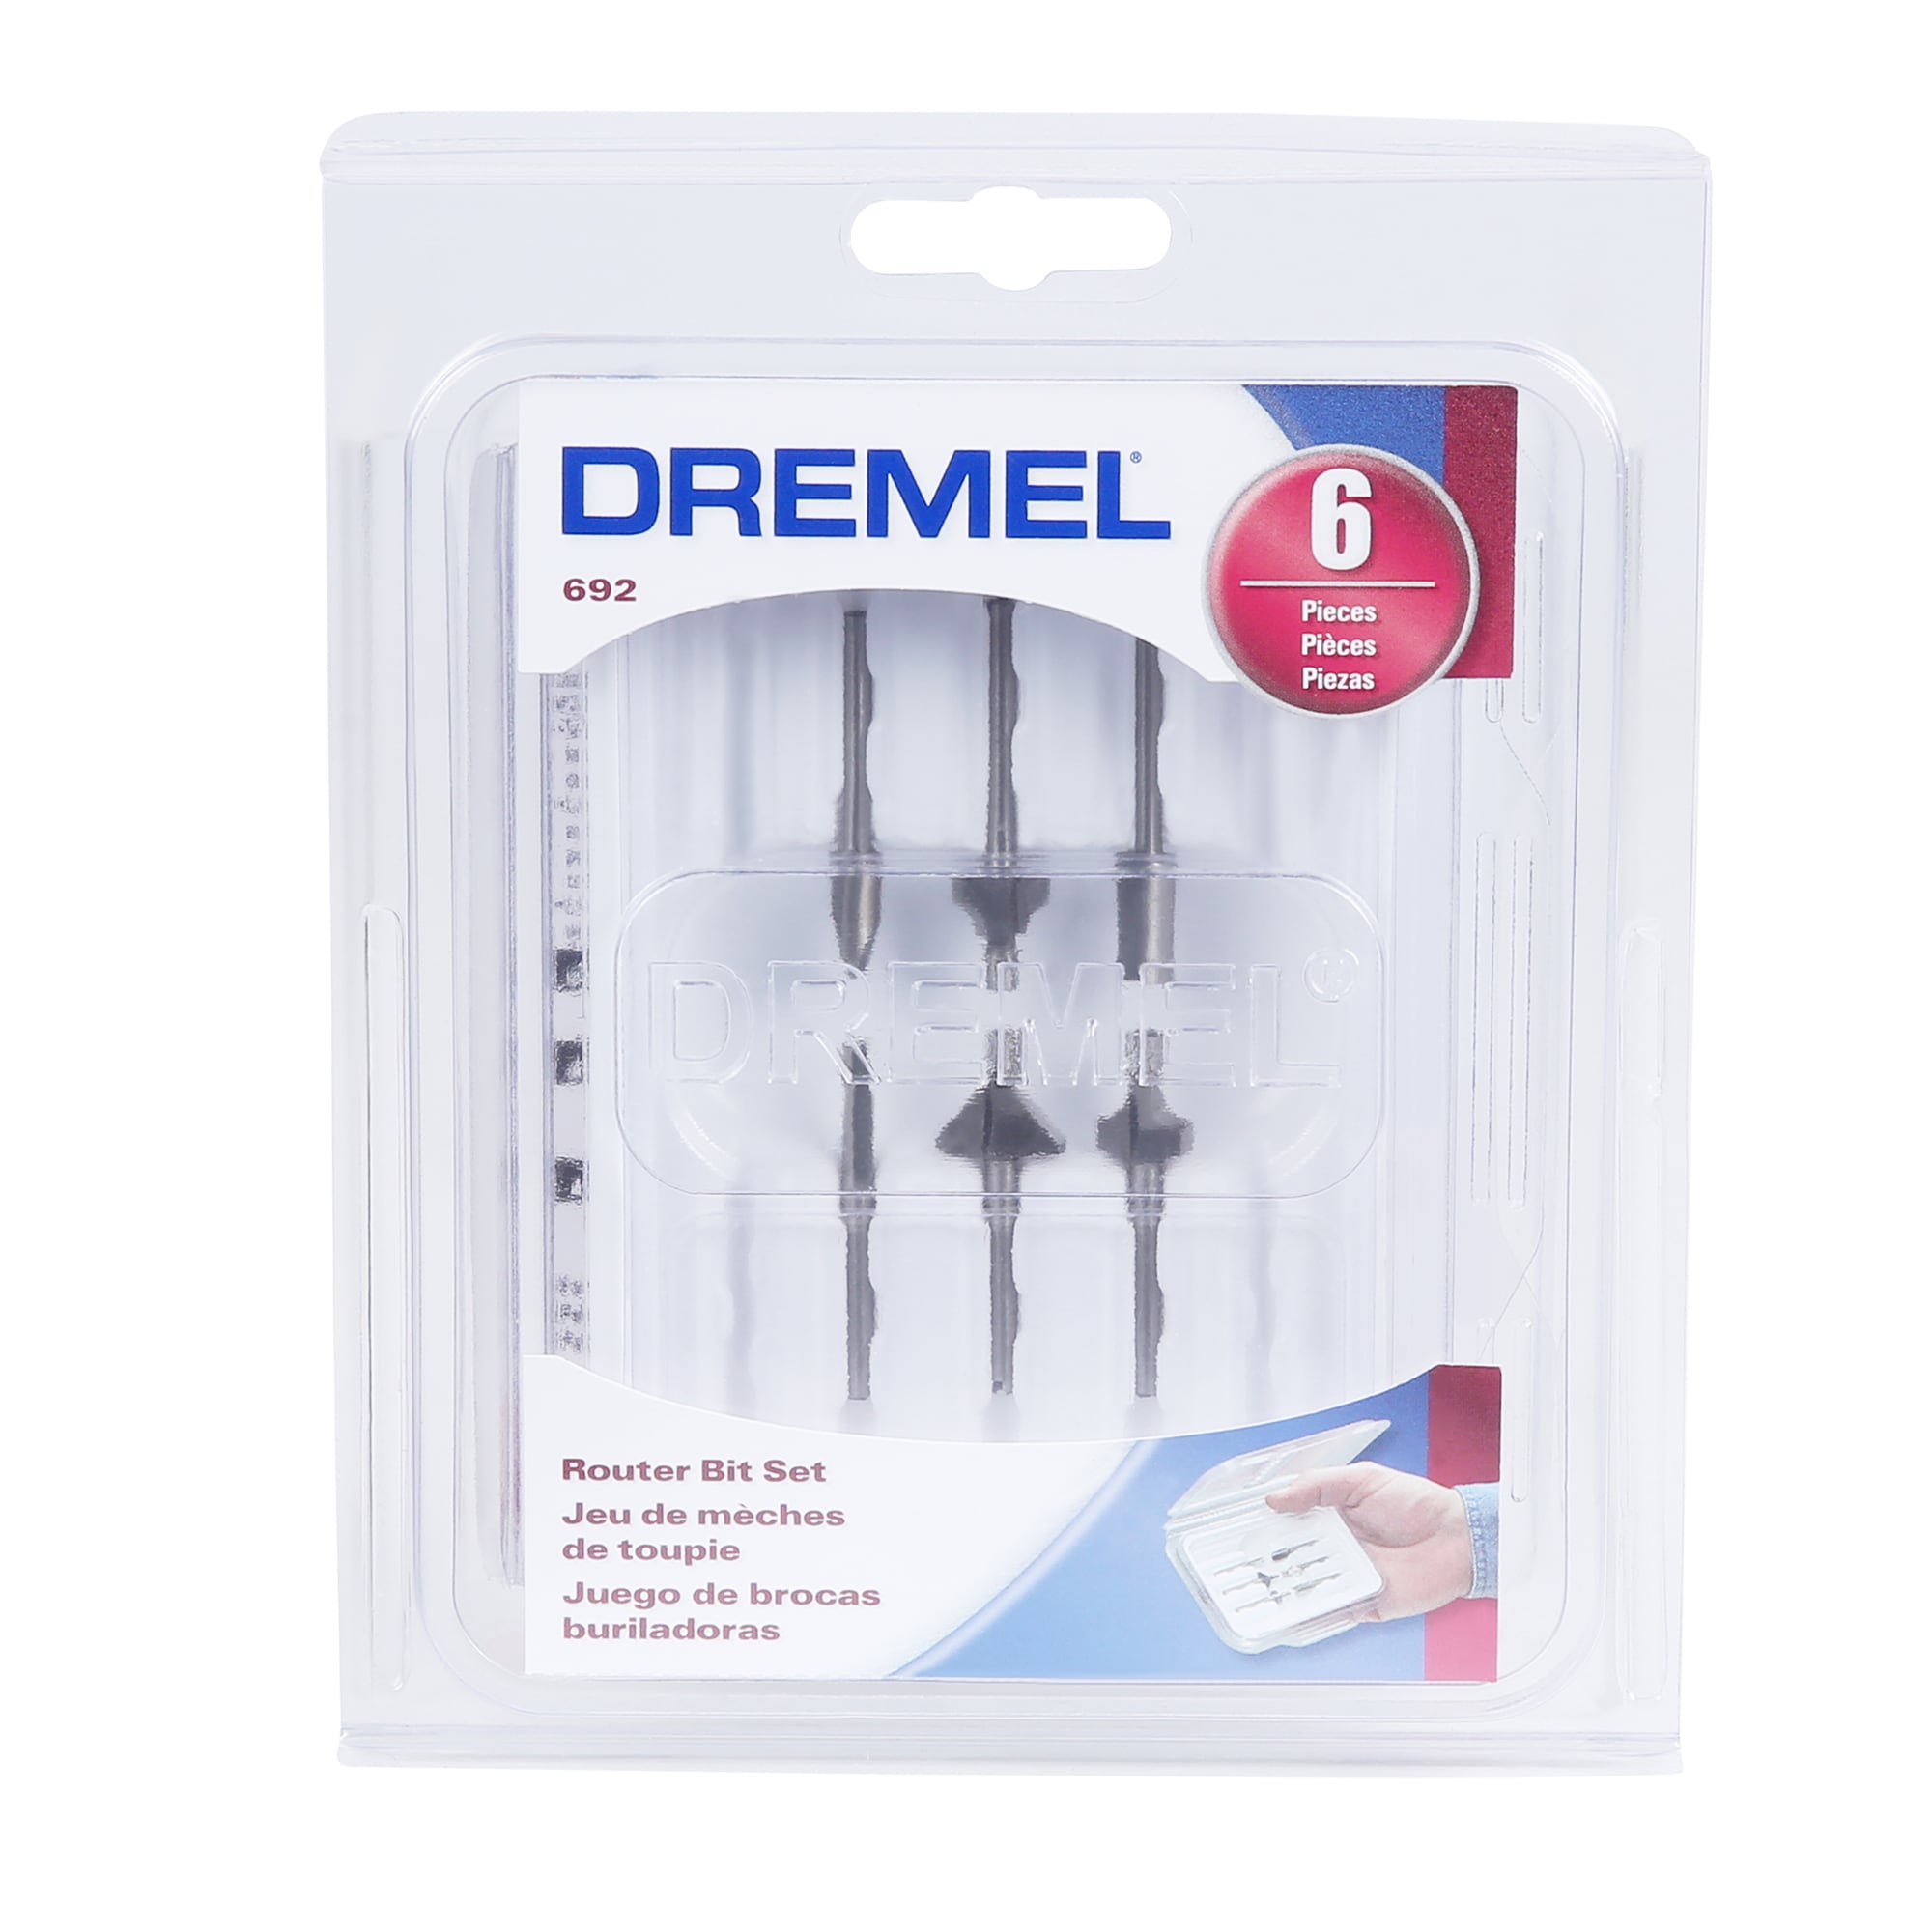 How to Use Dremel Router Bits 